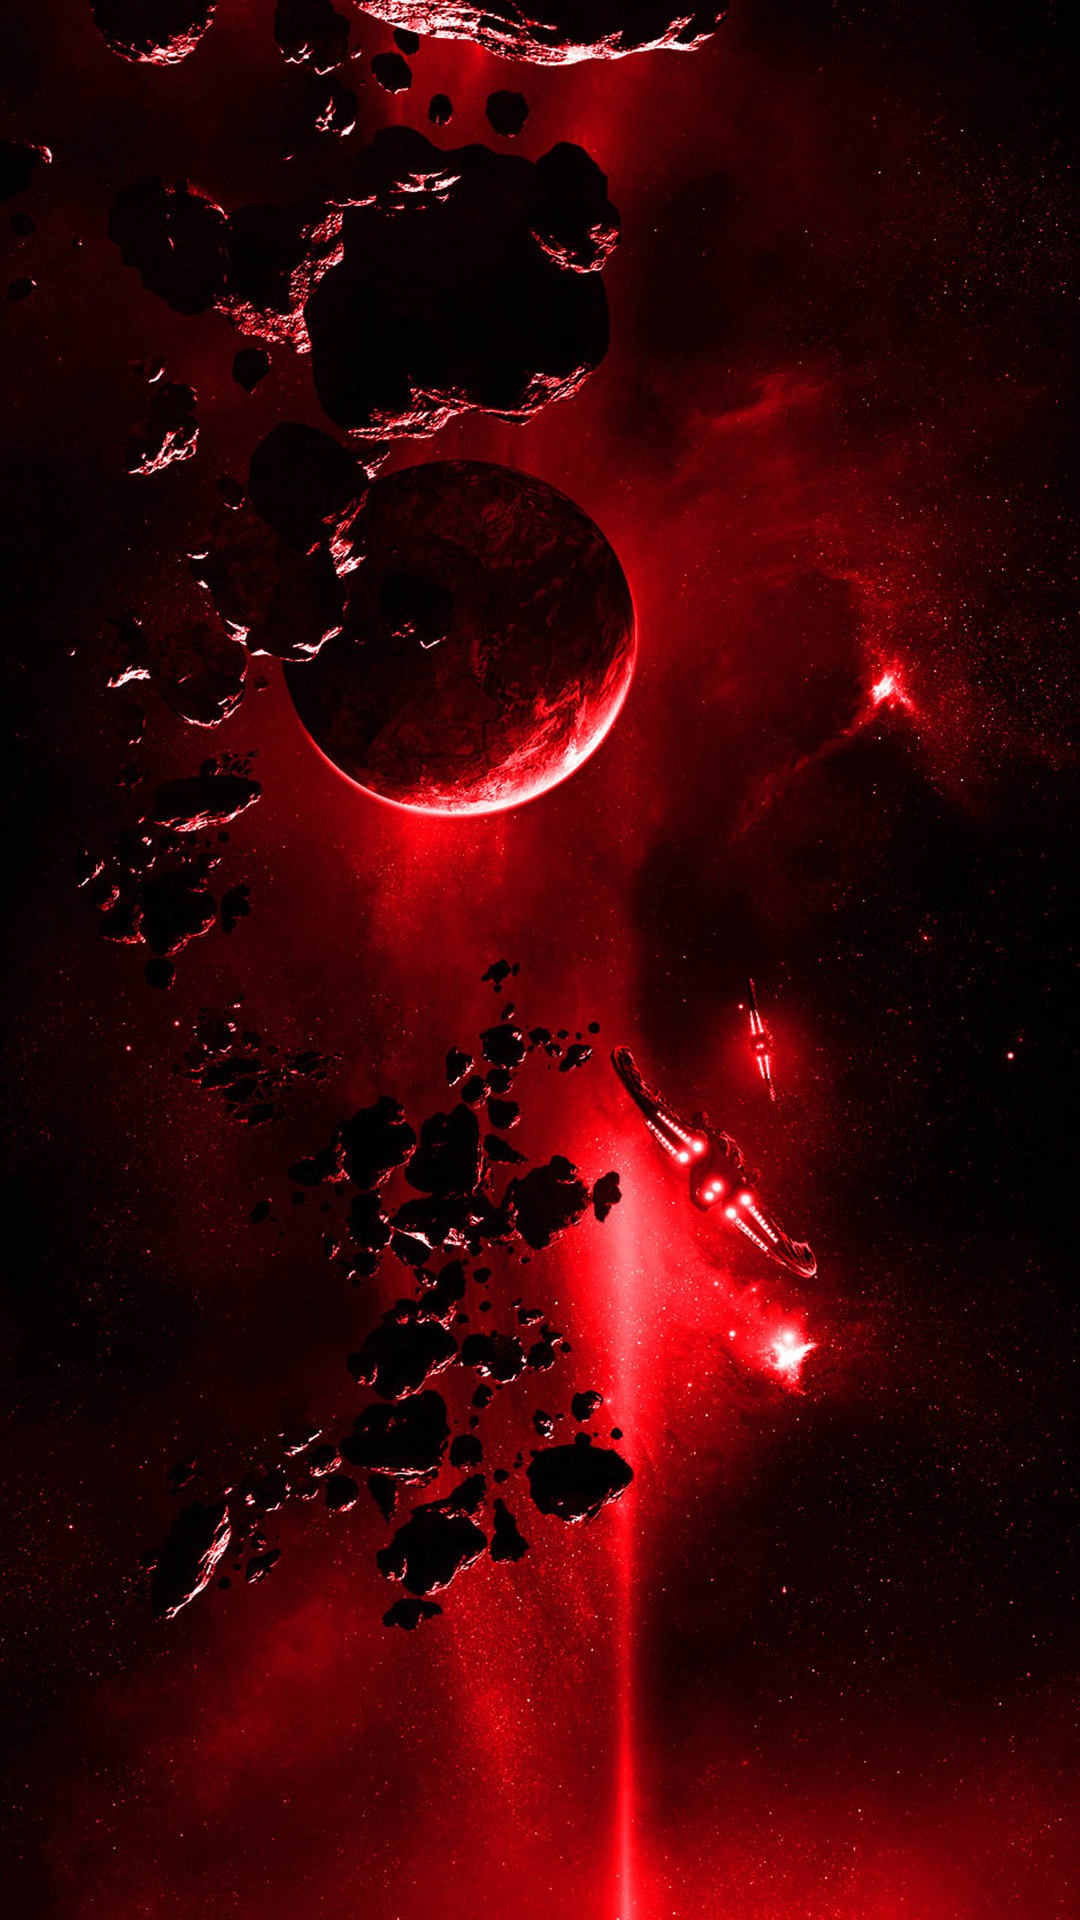 Red Space Iphone7 Wallpapers Iphone12 スマホ壁紙 待受画像ギャラリー